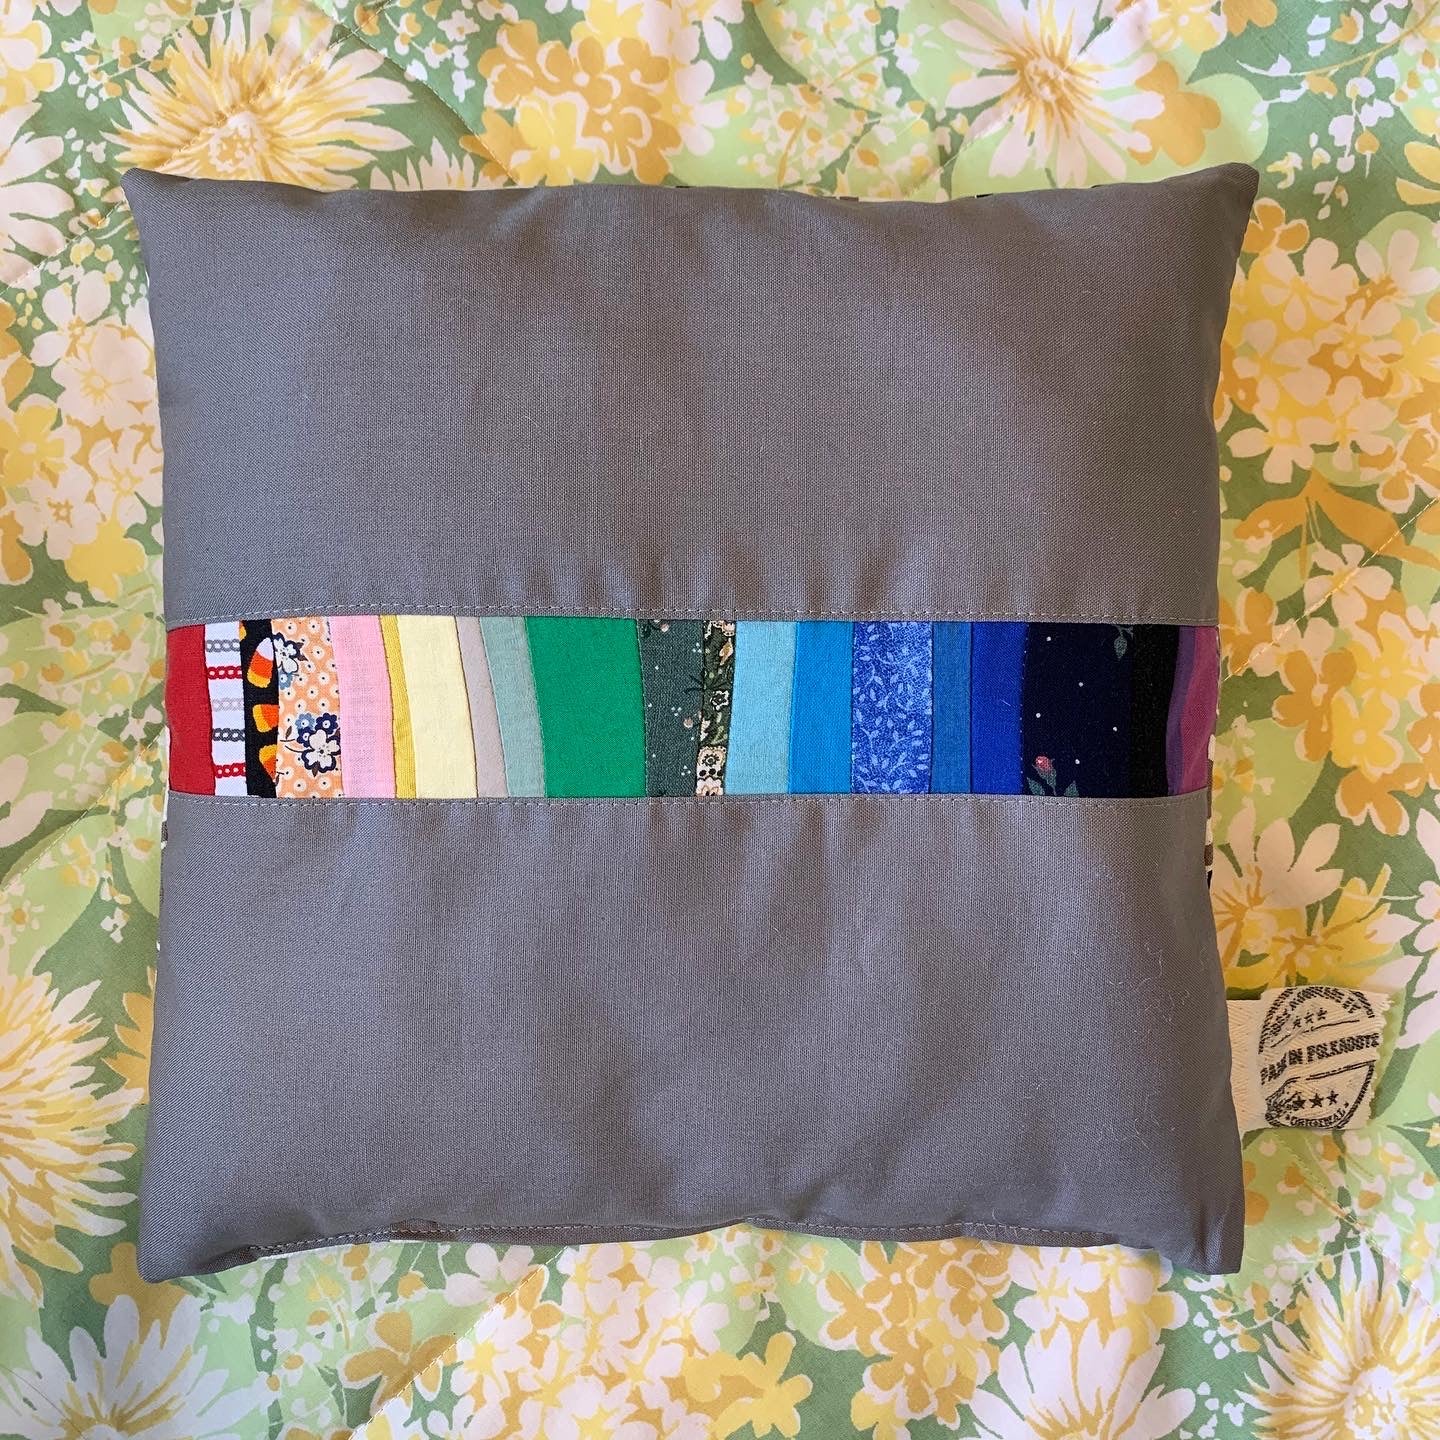 Rainbow Stripes little pillow, aerial view against a bright floral background